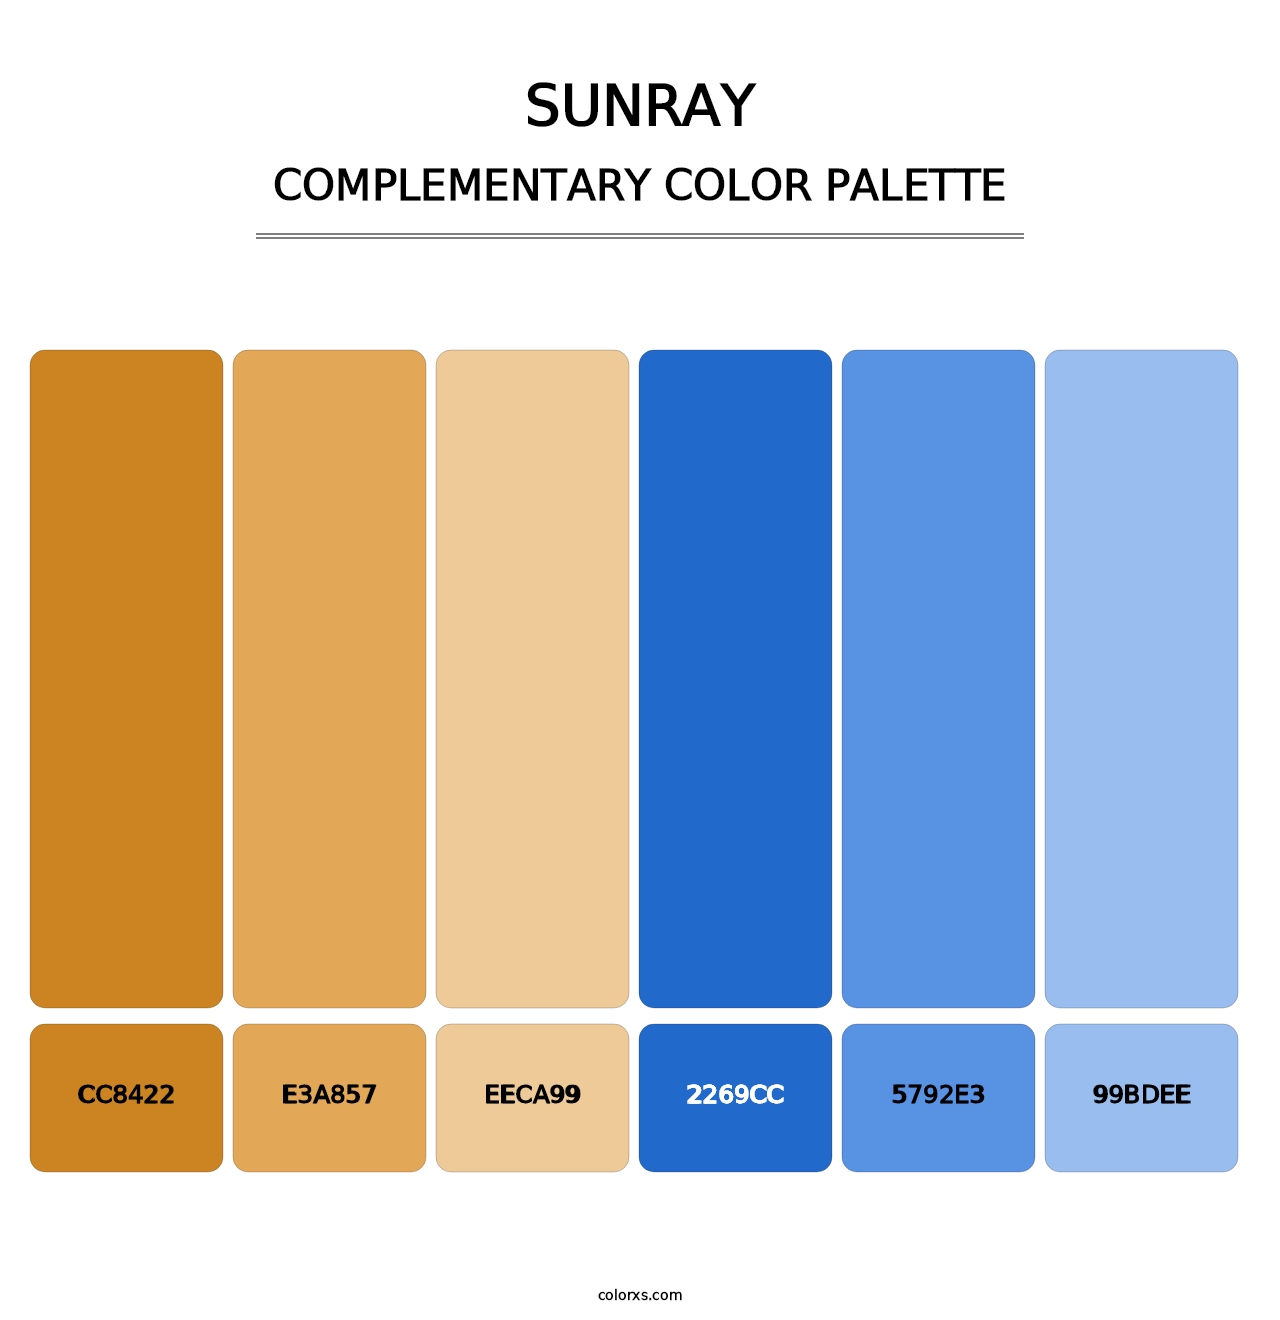 Sunray - Complementary Color Palette